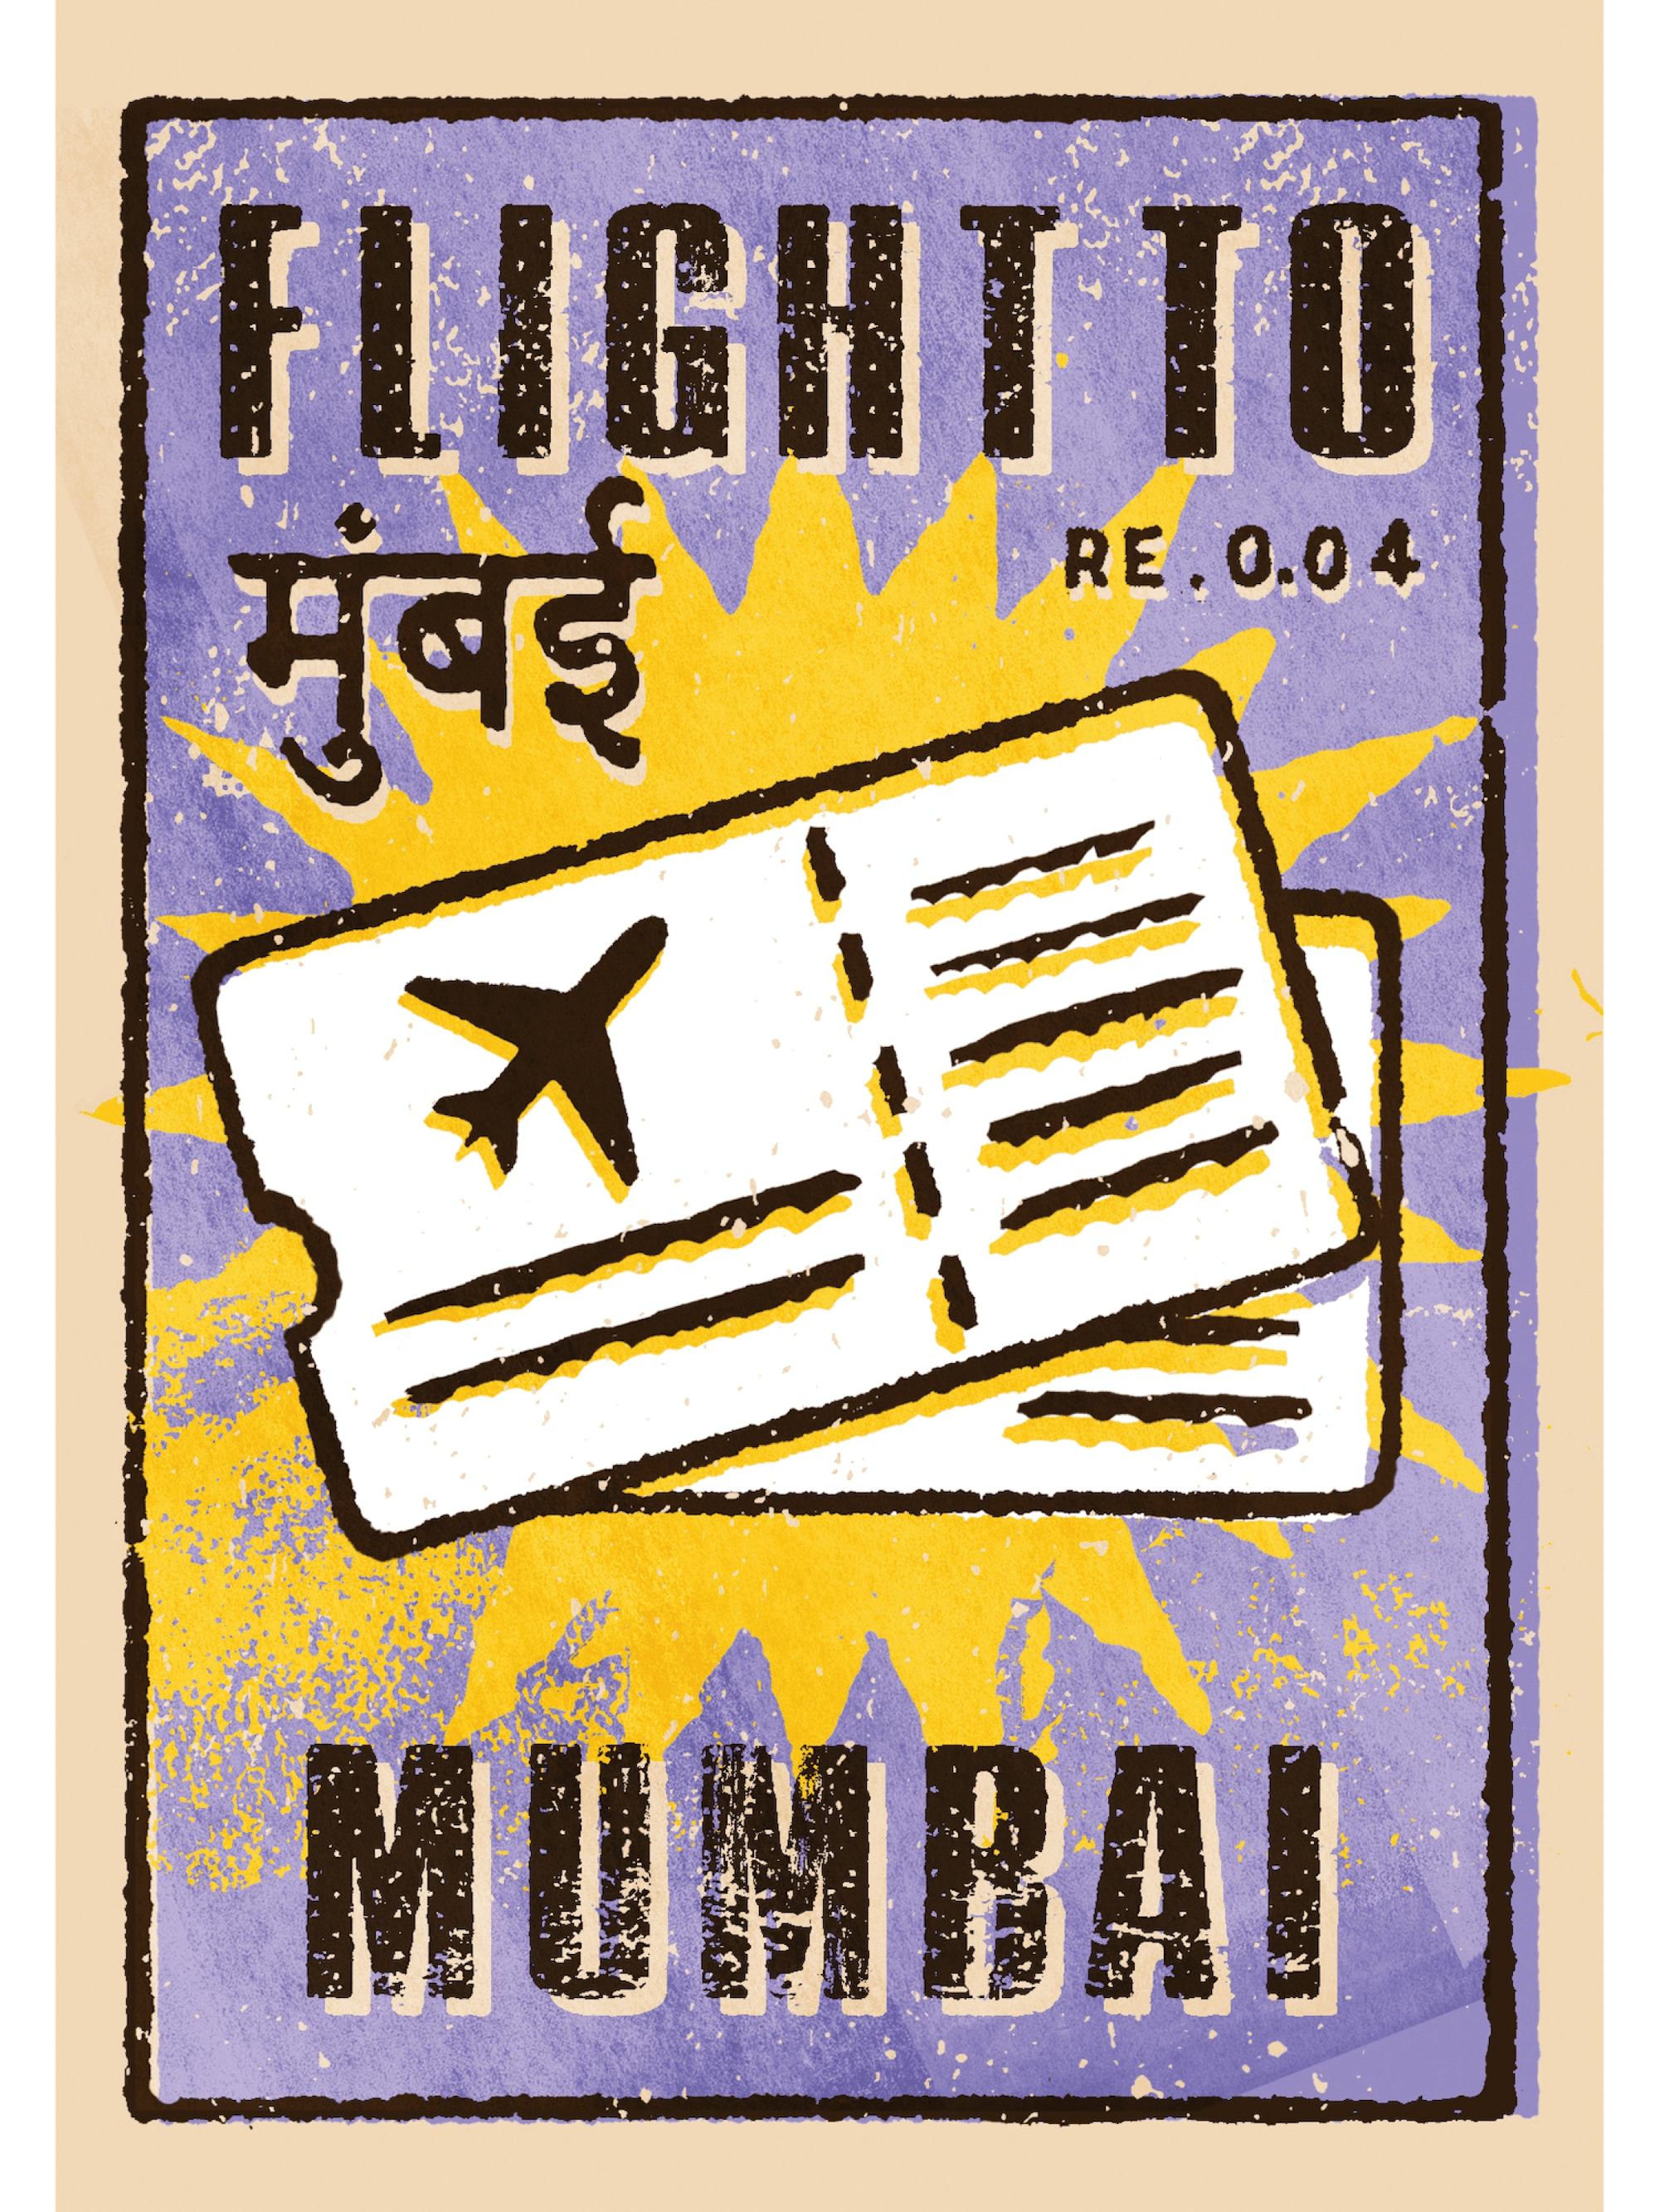 Two plane tickets lie collated with the text: ‘flight to mumbai.’ The background is purple with a star shaped yellow figure, the tickets are white with black detailing, and the text is black. 